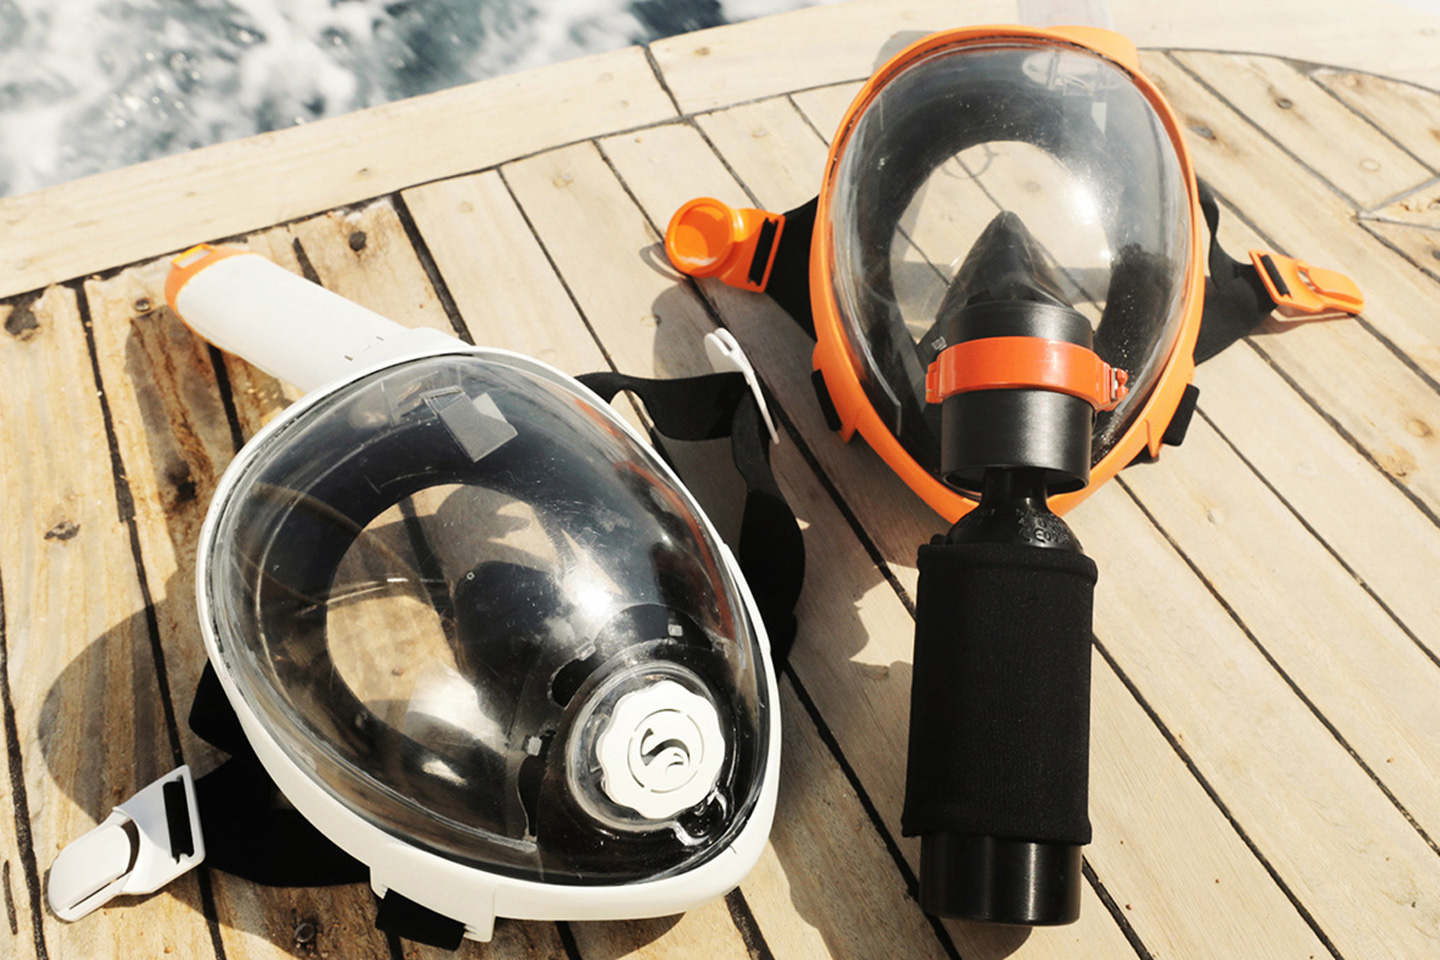 #Unique diving mask comes with its own submarine-inspired periscope to see above obstacles